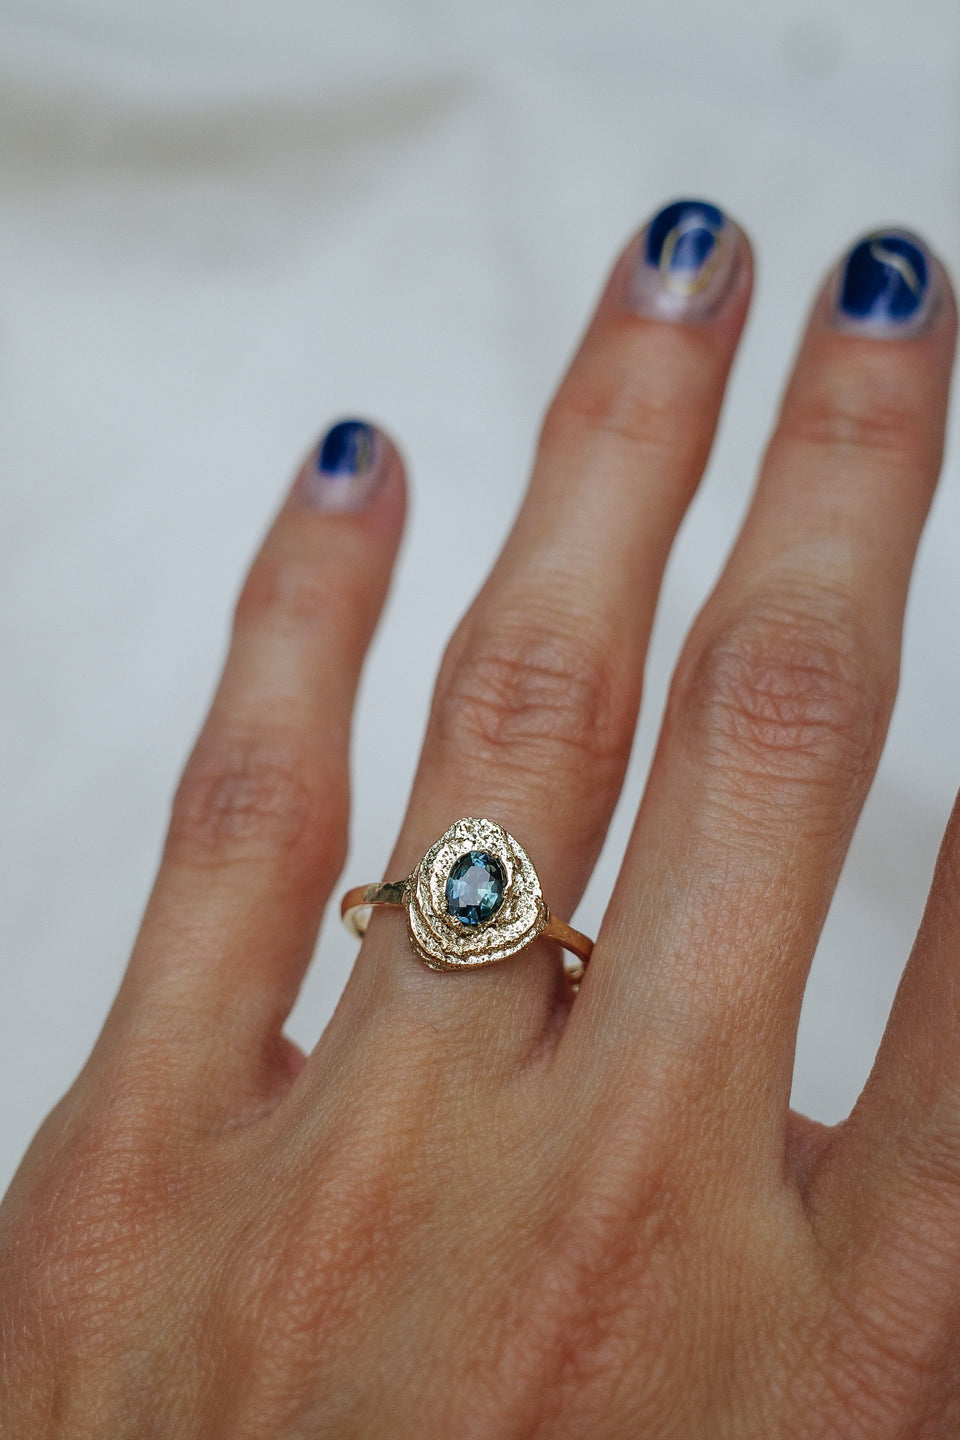 Teal Stratified Sapphire Solitaire